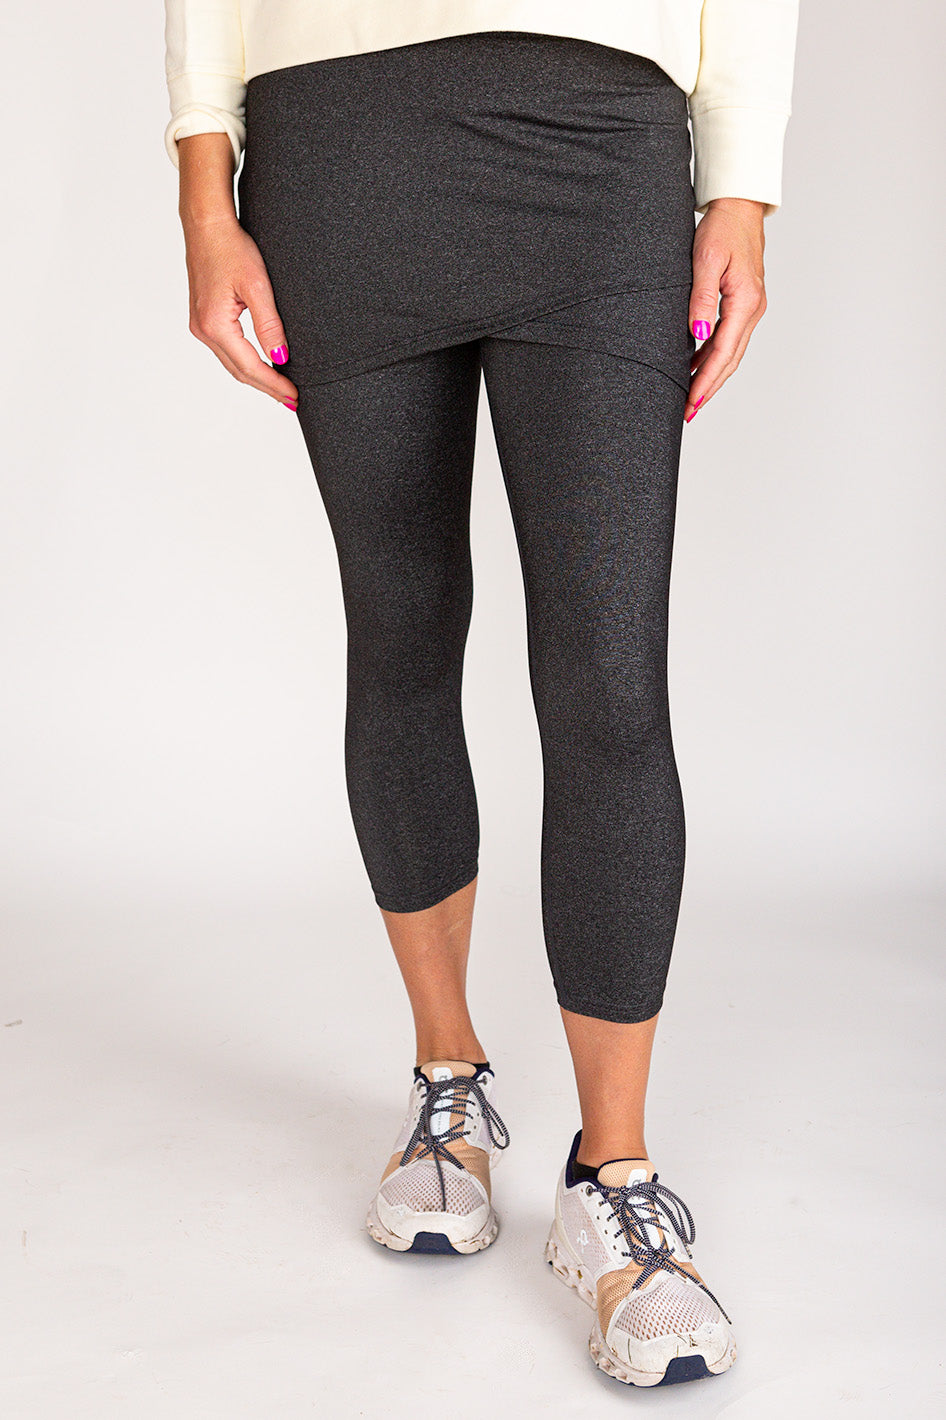 Grey Knitted High Waist Avia Leggings With Pockets With Zipper For